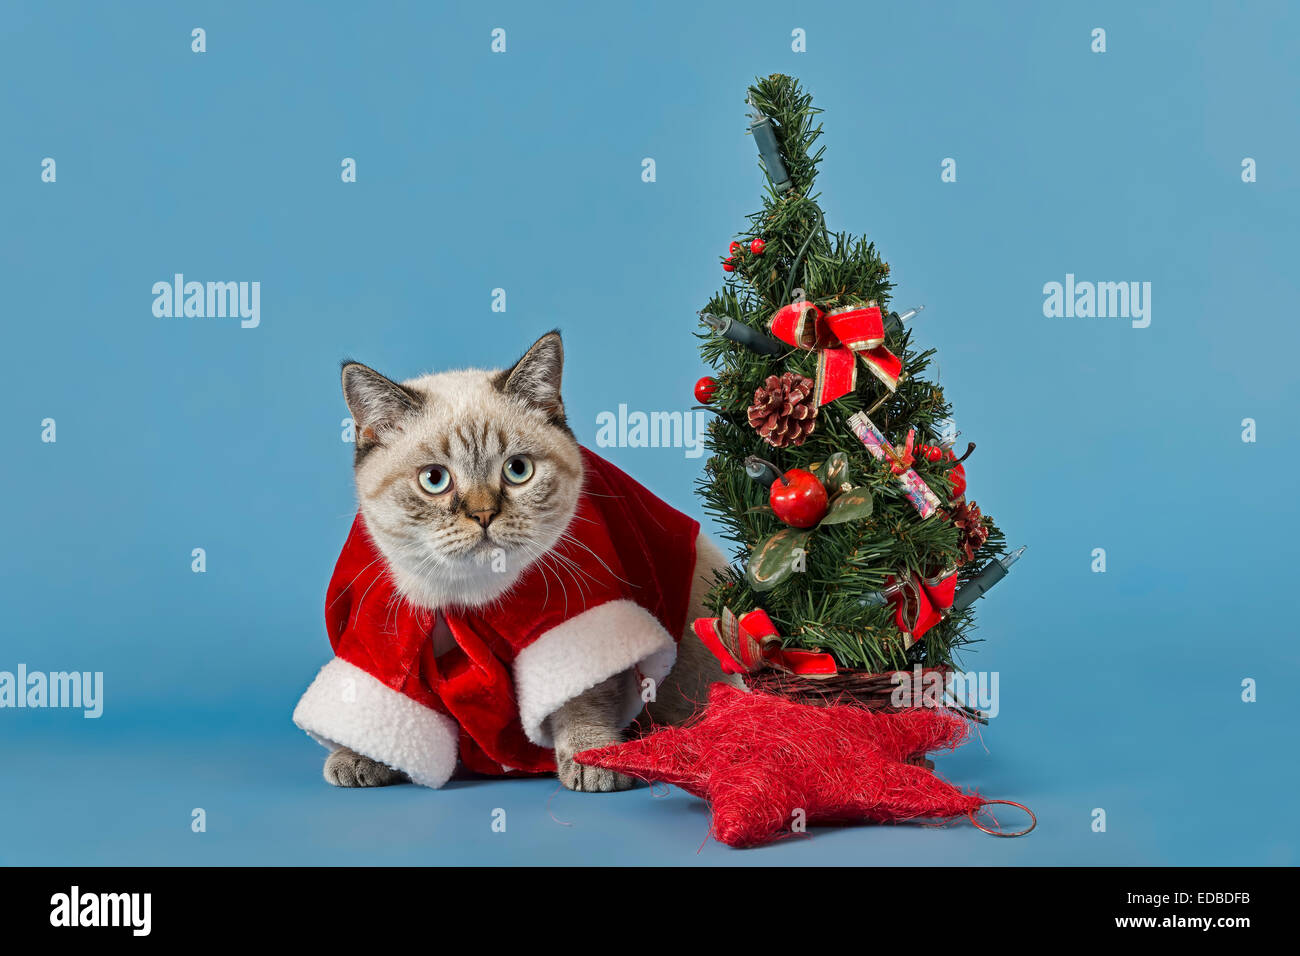 British Shorthair cat in christmas costume with Christmas tree Stock Photo